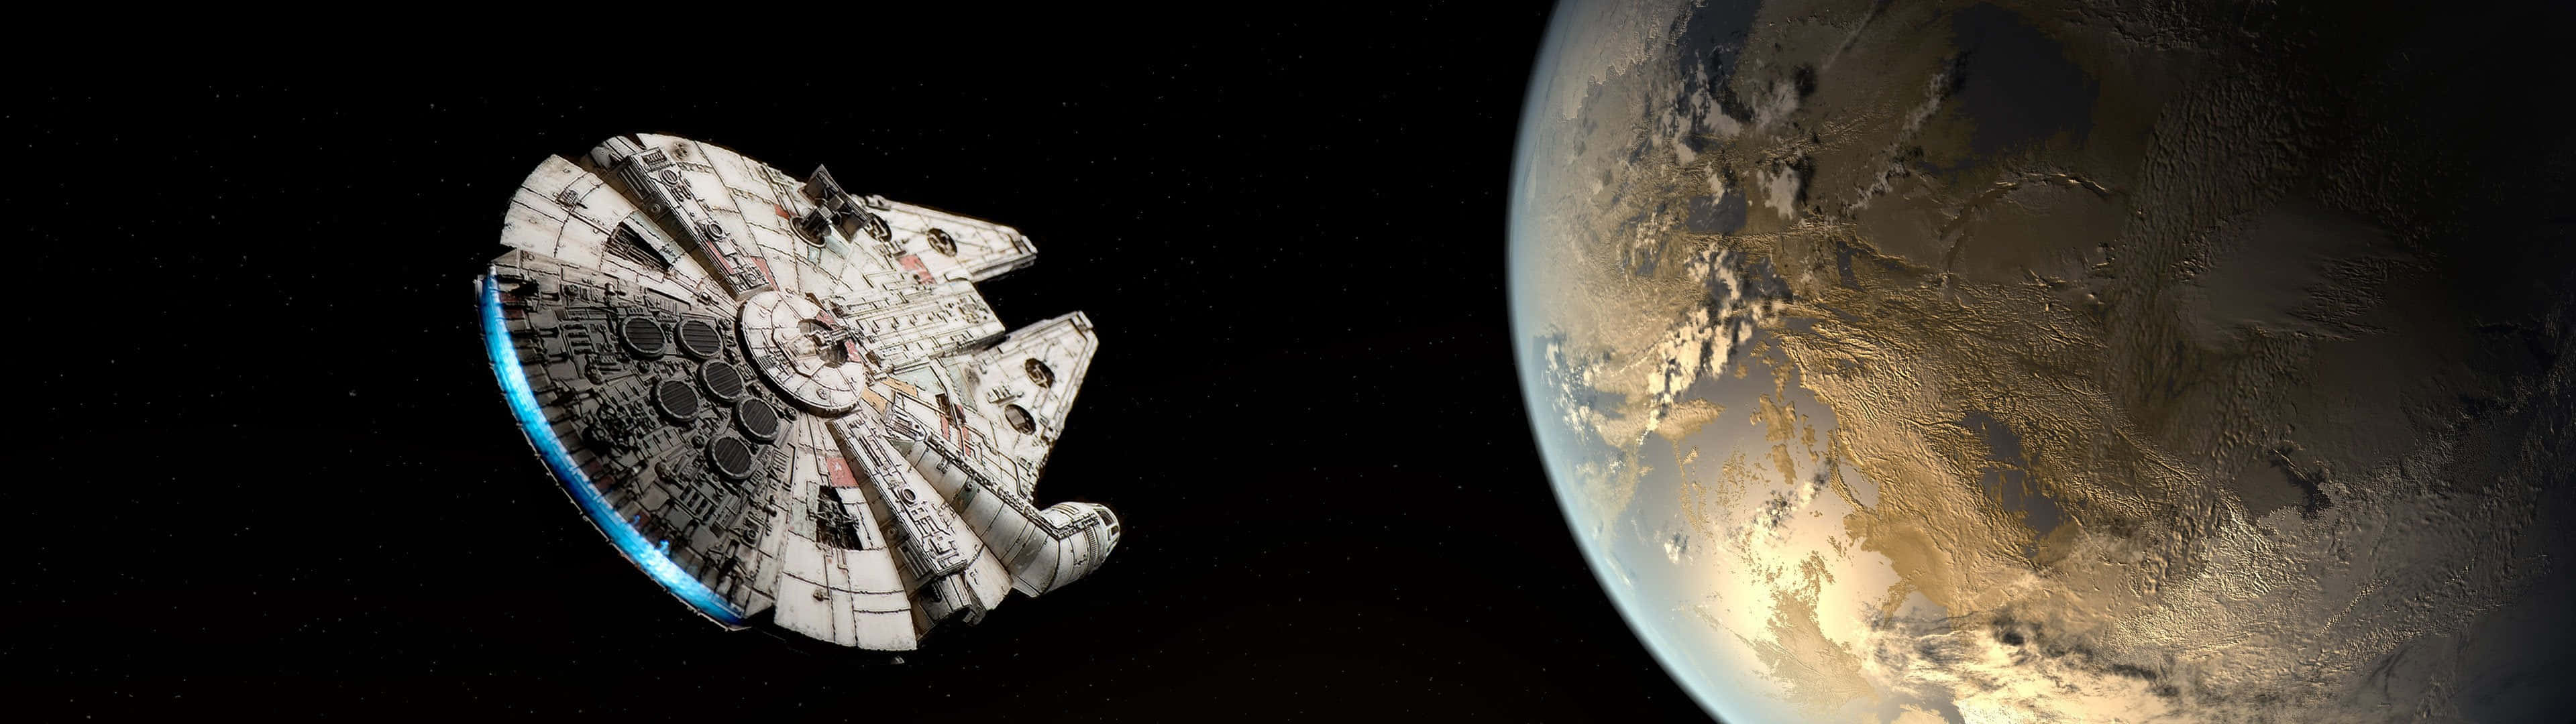 The iconic Millenium Falcon from Star Wars. Wallpaper